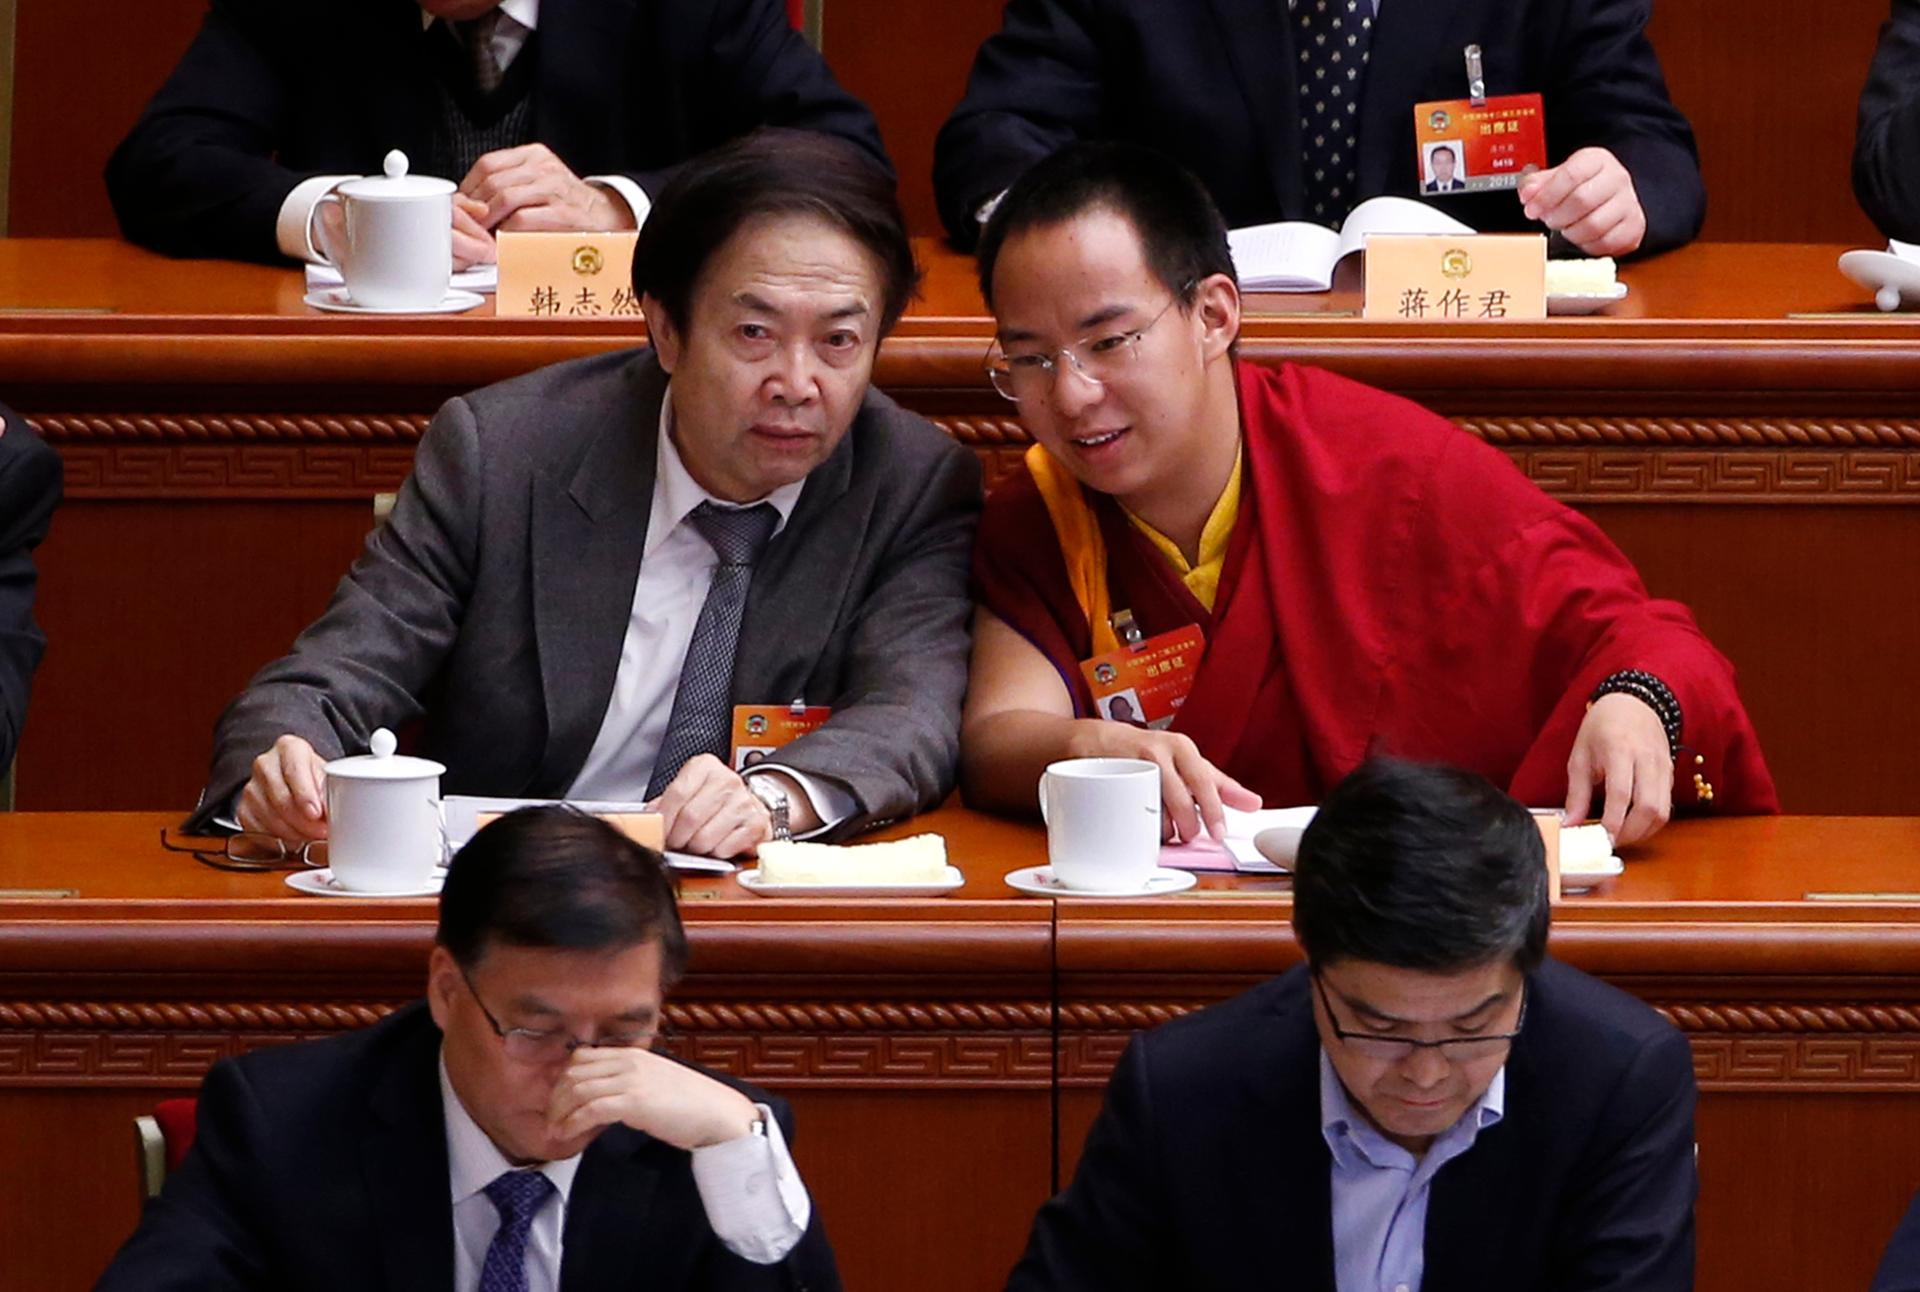 Gyaltsen Norbu (R), the 11th Panchen Lama, speaks with a delegate ahead of the opening of the third plenary meeting of Chinese People's Political Consultative Conference (CPPCC) at the Great Hall of the People in Beijing, March 11, 2015. 